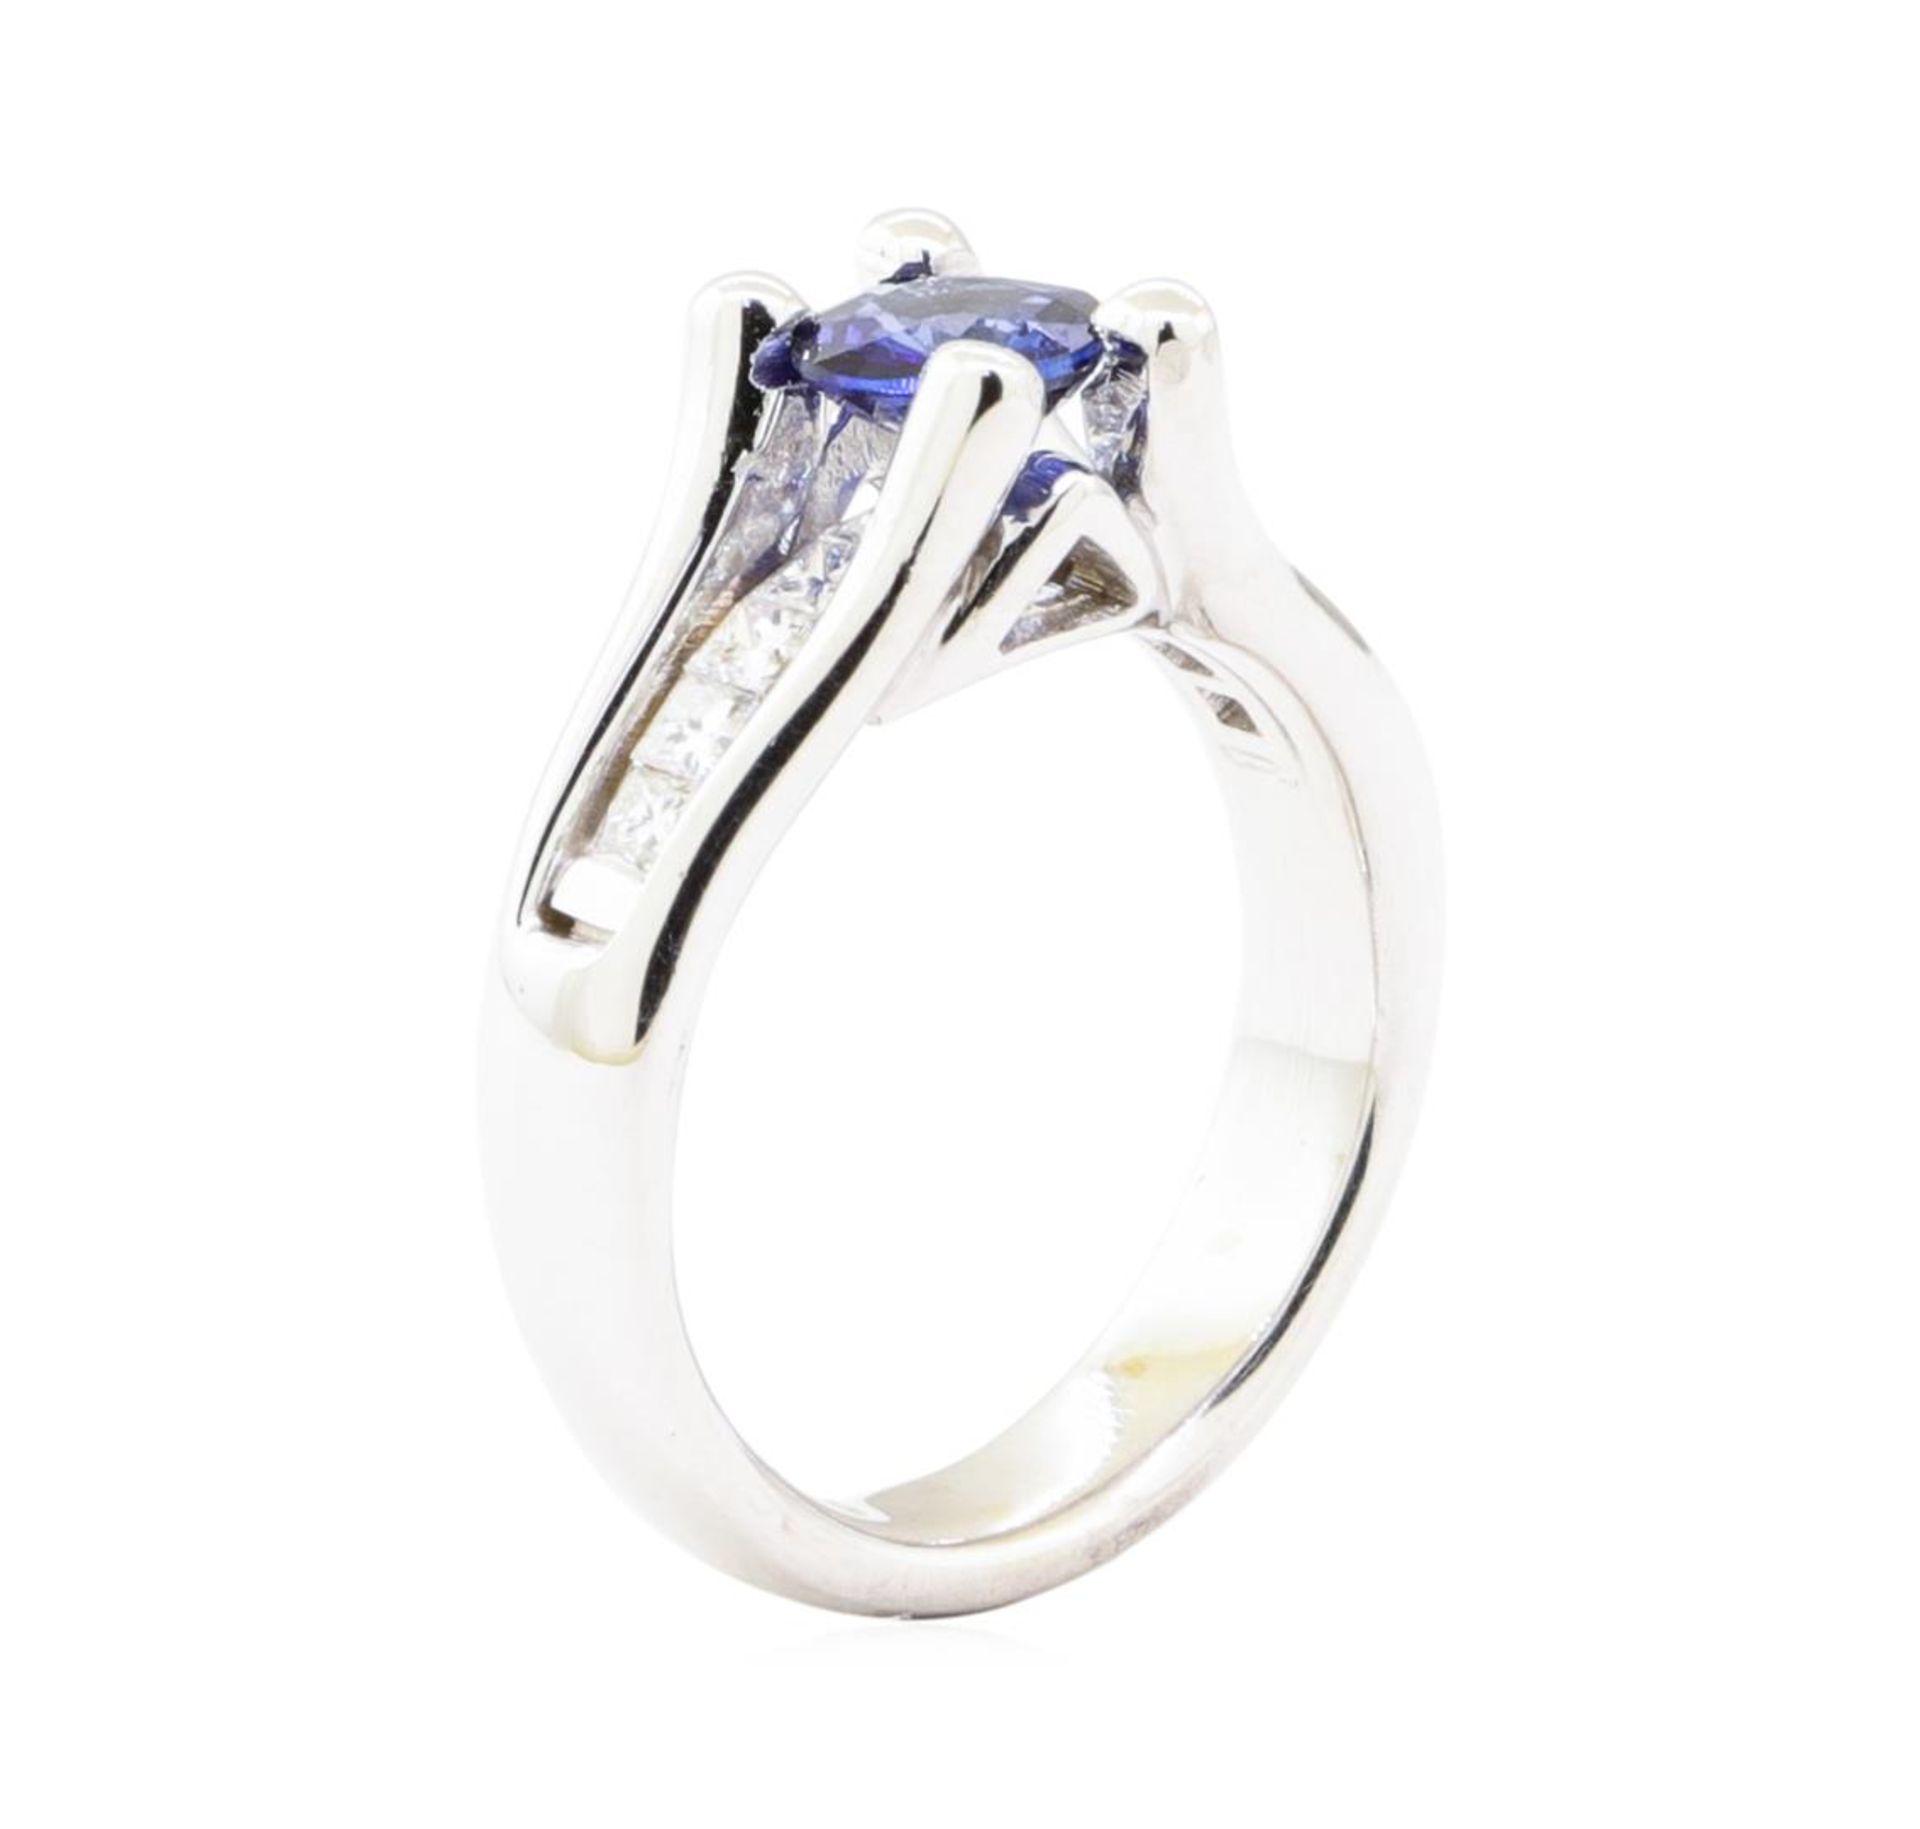 1.28 ctw Sapphire And Diamond Ring - 14KT White Gold - Image 4 of 5